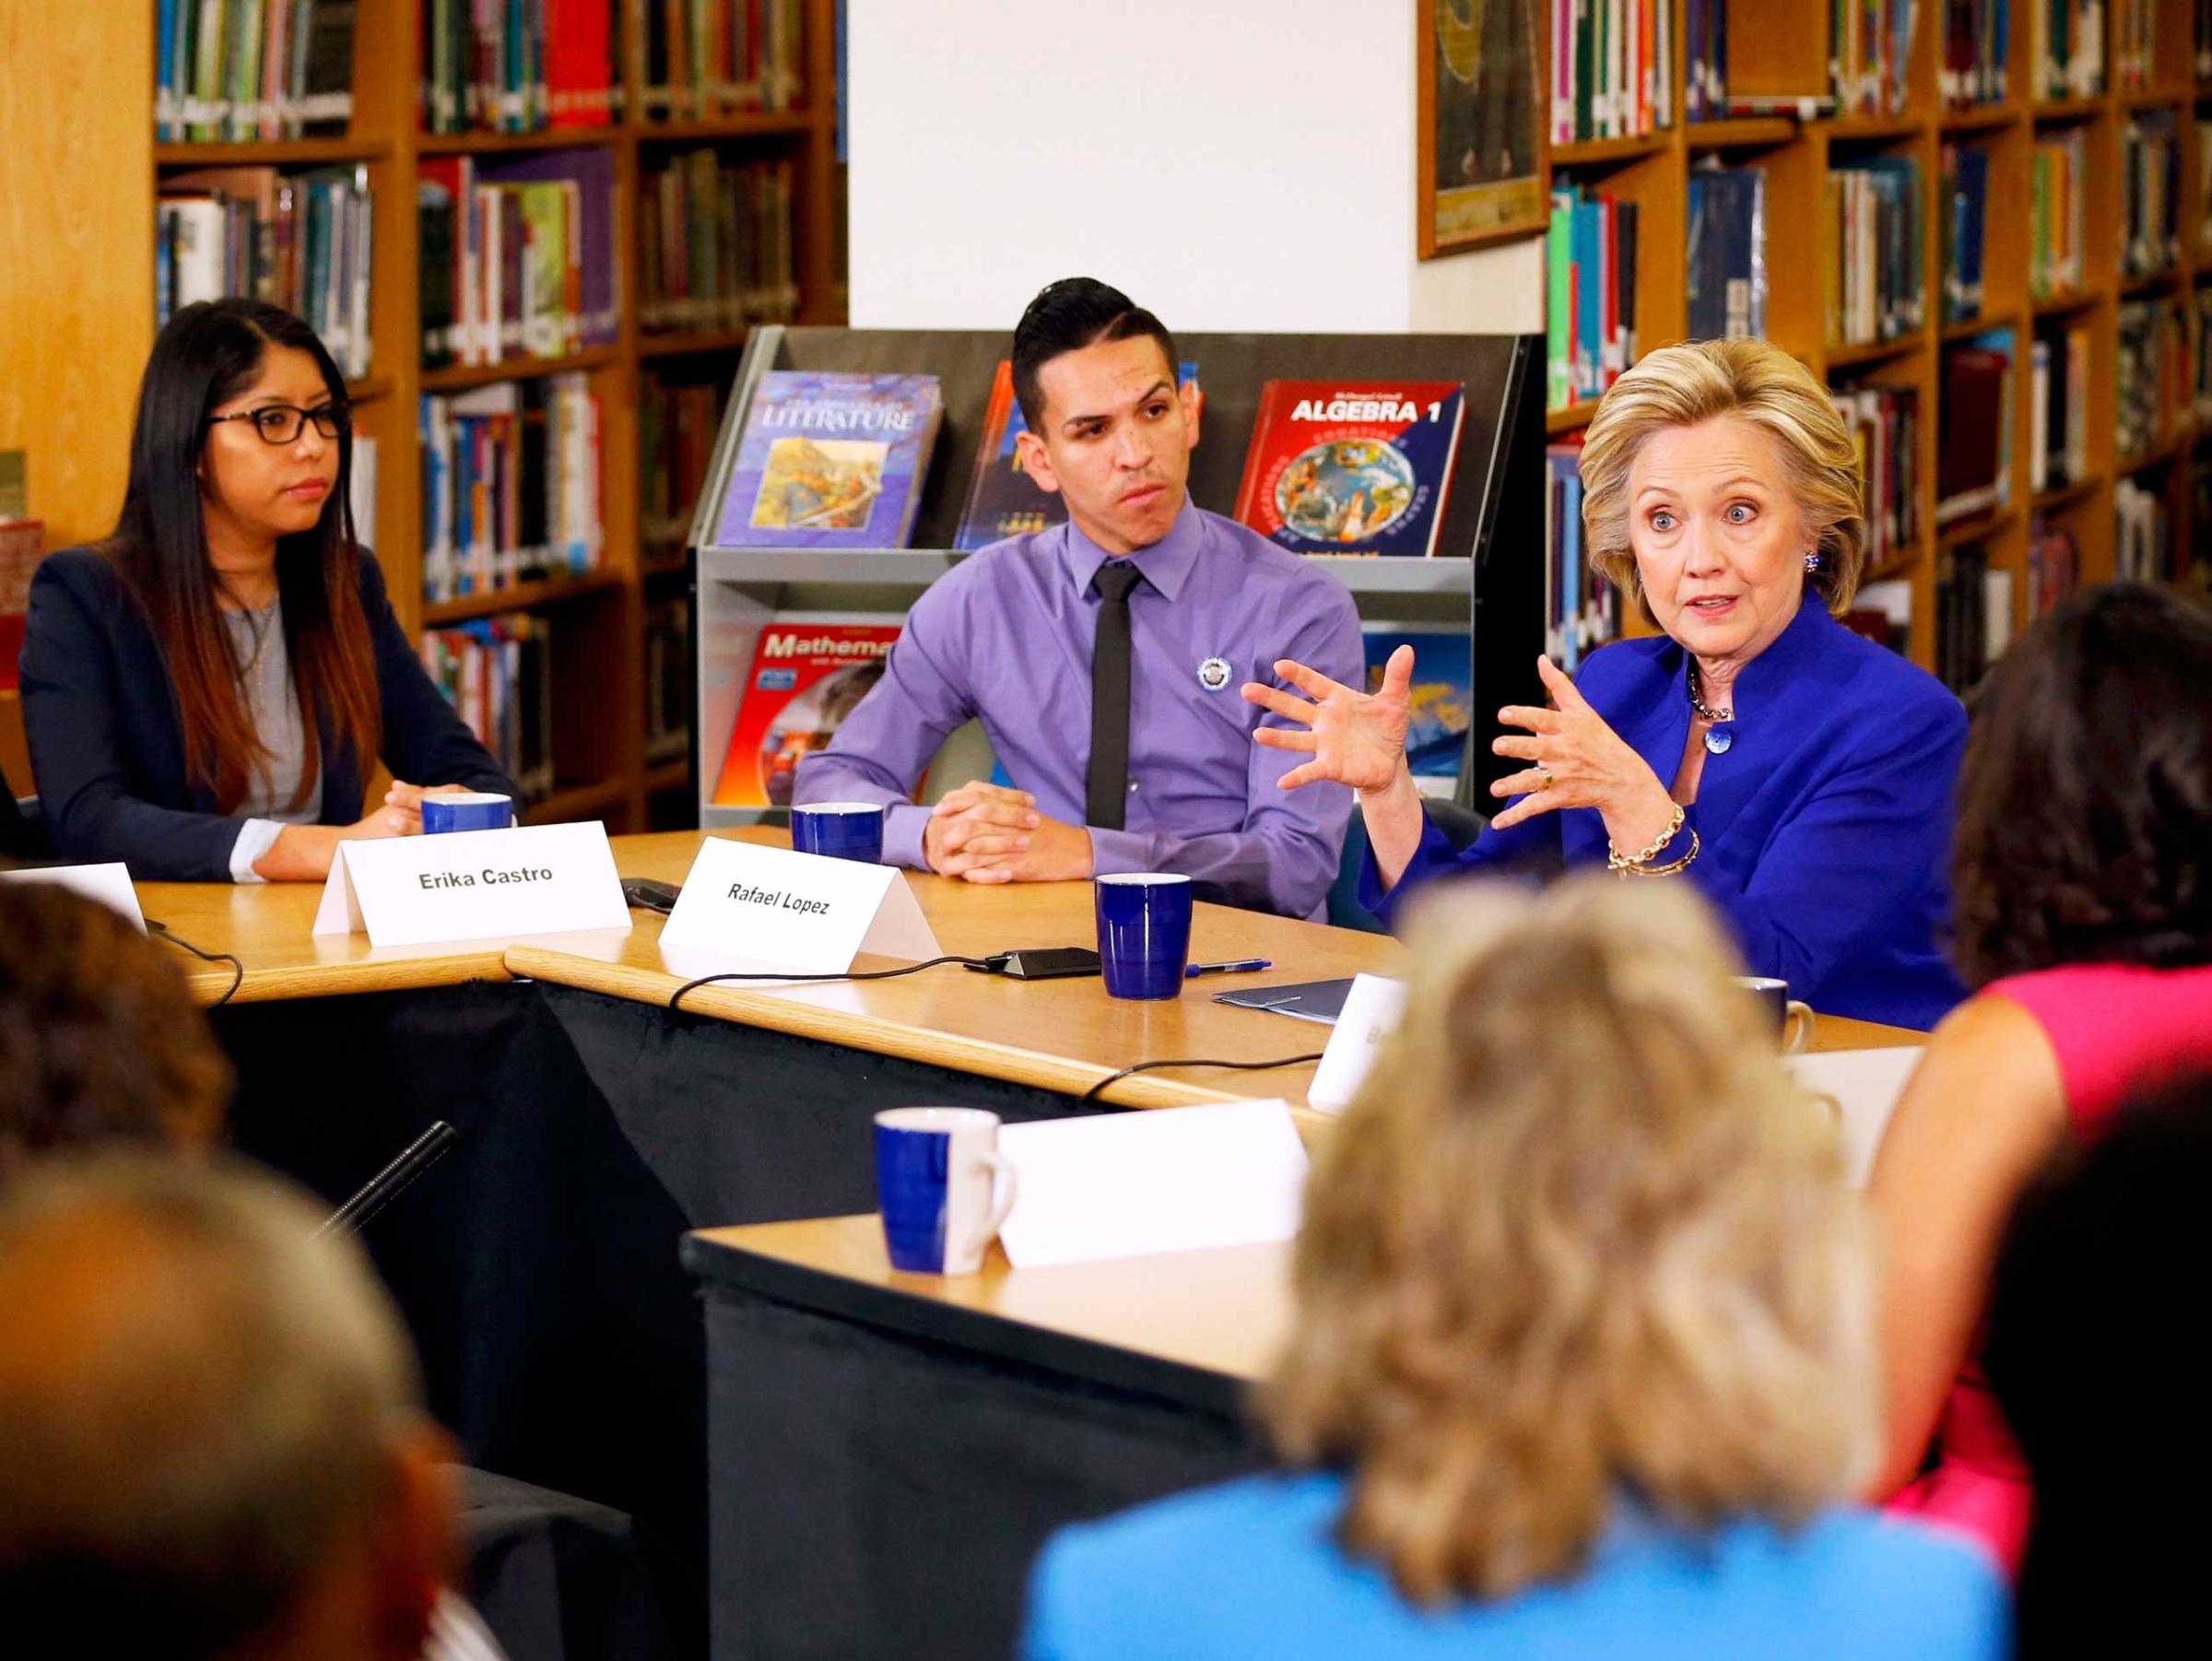 Former U.S. Secretary of State Hillary Clinton (R) takes part in a roundtable of young Nevadans discussing immigration as she campaigns for the 2016 Democratic presidential nomination at Rancho High School in Las Vegas, on May 5, 2015.